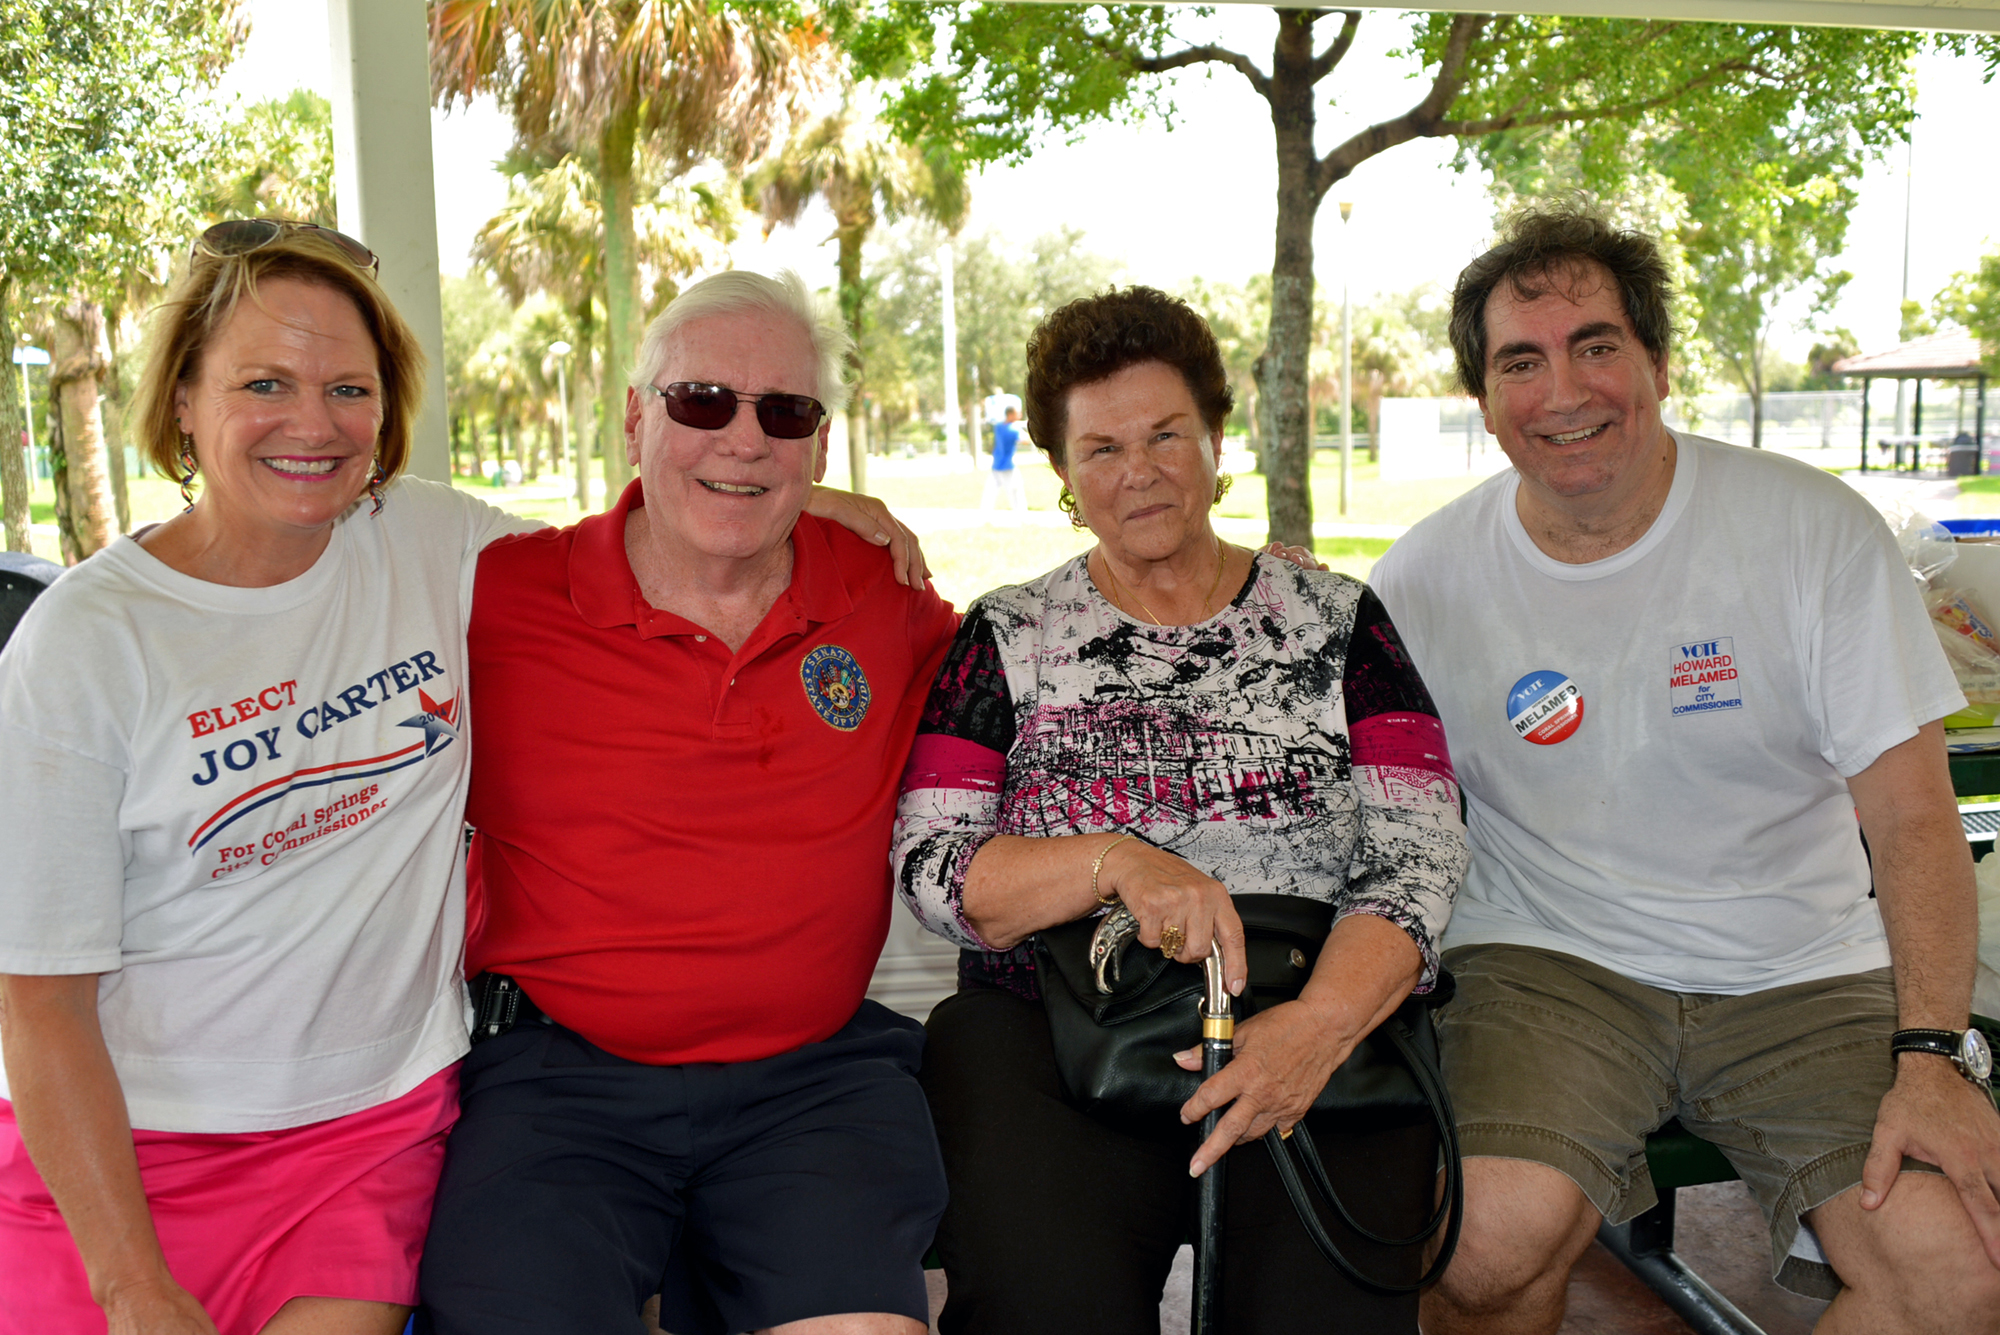 Local Dems Hold a "Rock the Vote" Community Picnic